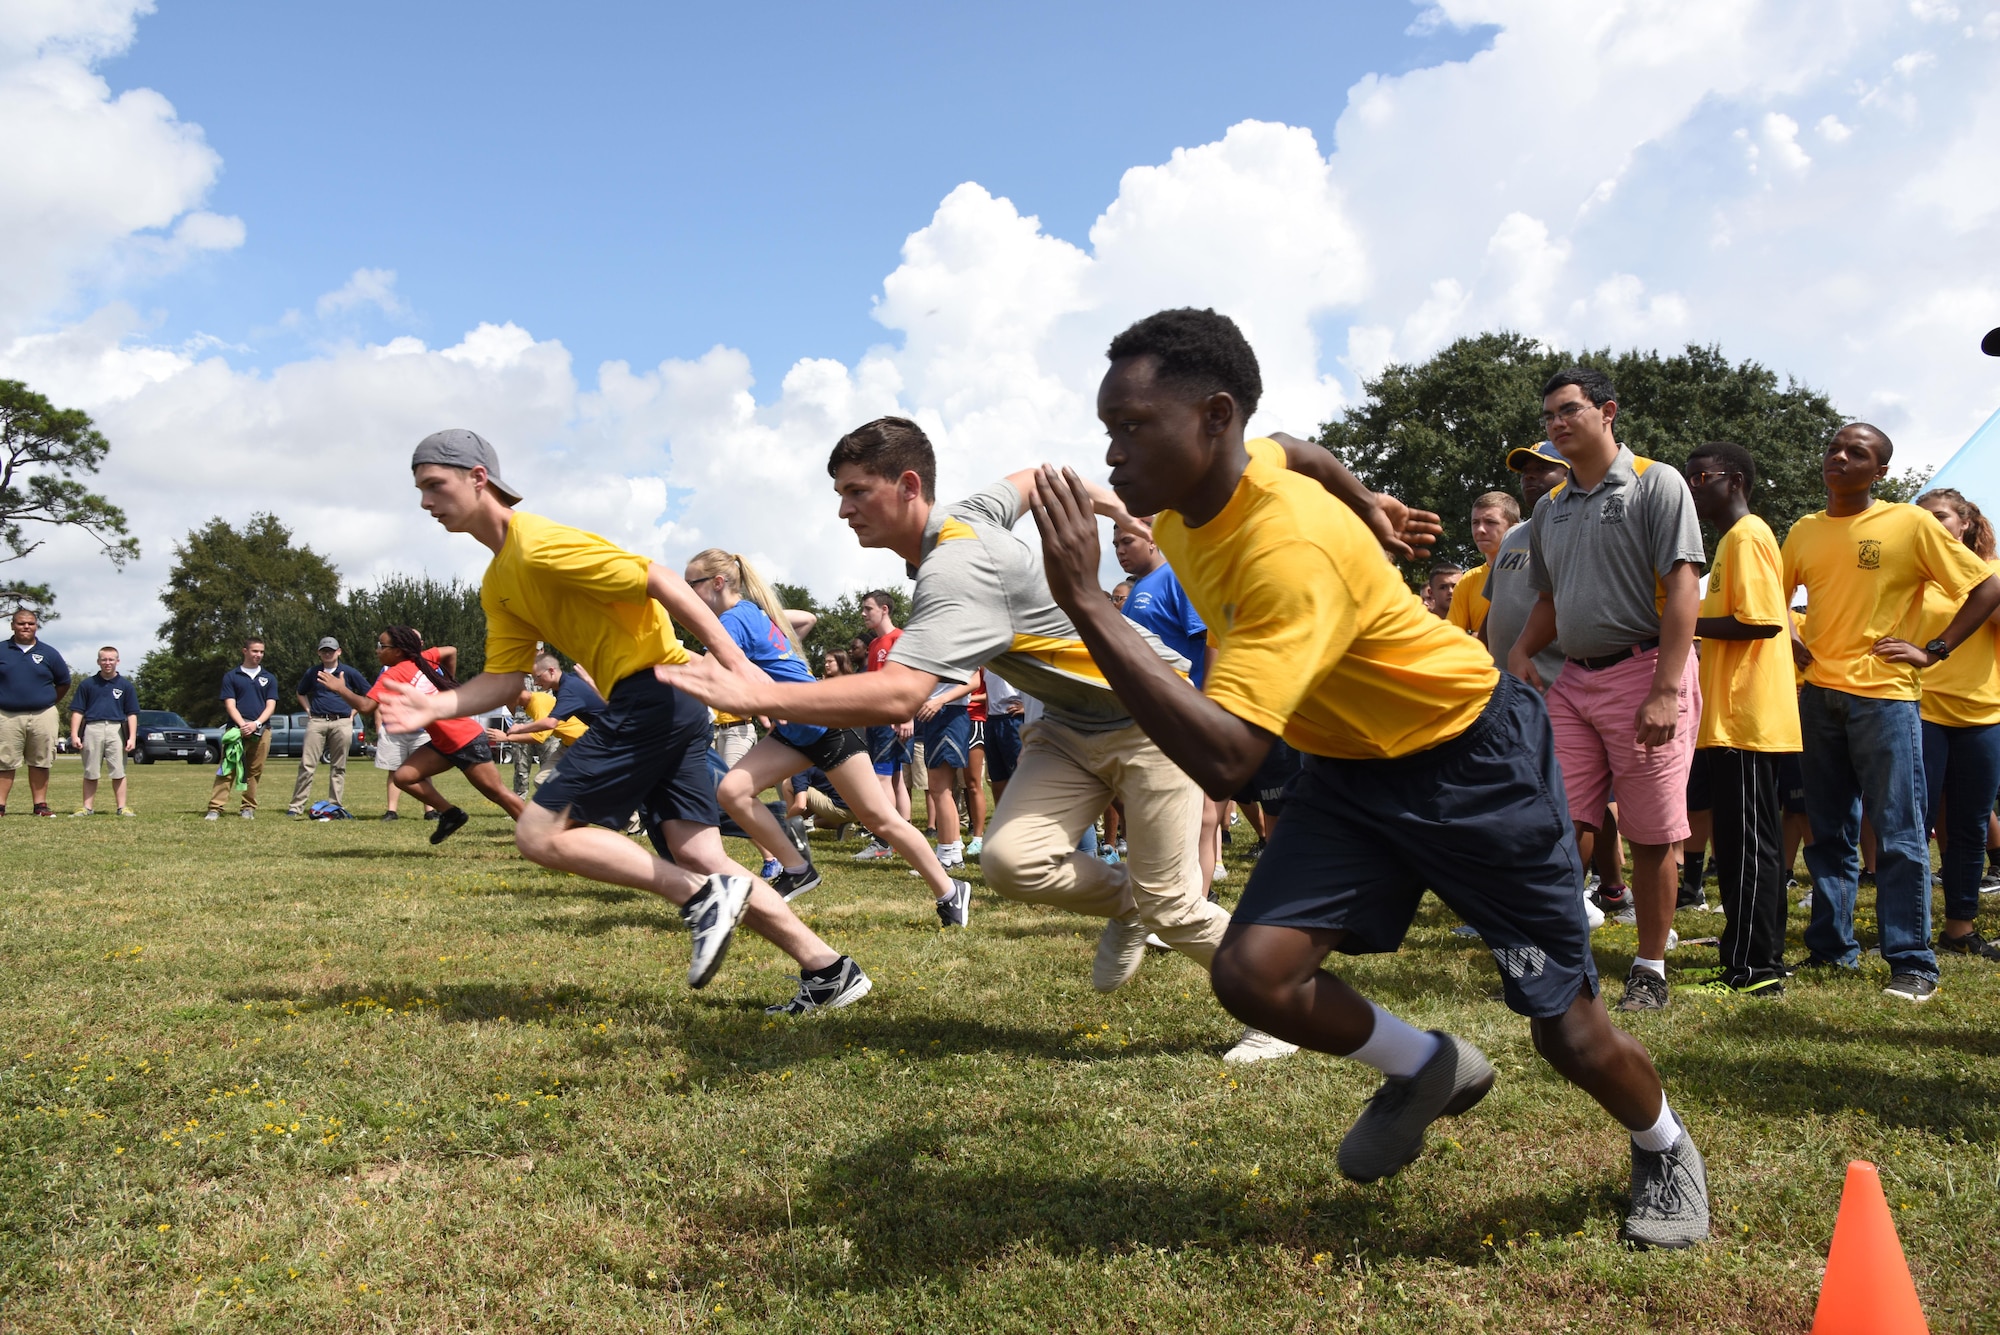 Local high school Junior ROTC cadets begin a relay race at the Science, Technology, Engineering and Mathematics Diversity Outreach Day Sept. 15, 2017, on Keesler Air Force Base, Mississippi. The event consisted of 10 Mississippi gulf coast high school Junior ROTC units viewing an 81st Security Forces Squadron military working dog demonstration and receiving information about Air Force opportunities and accession requirements with an emphasis on STEM. They also competed in several team building activities. (U.S. Air Force photo by Kemberly Groue)